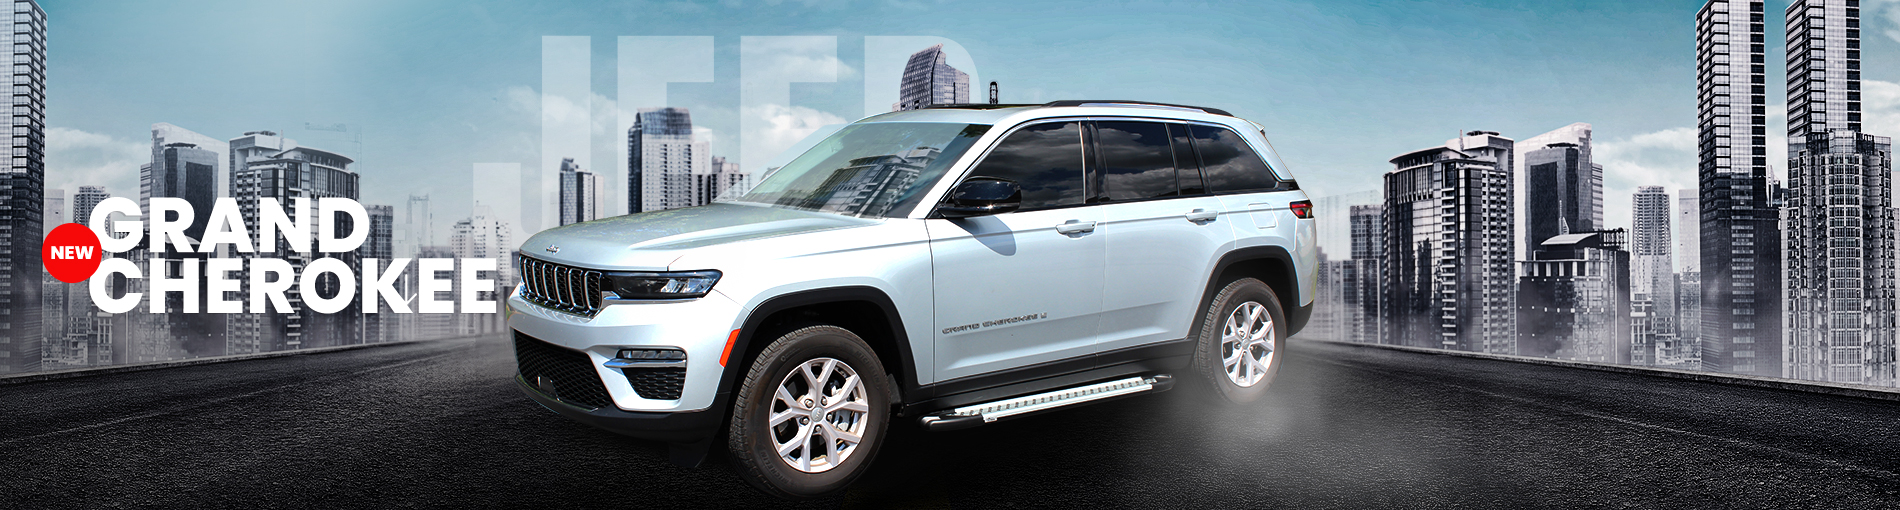 https://romik.com/amfinder/?find=2023-jeep-grand-cherokee-two-row-21883&sid=Am8ASQj86r&product_list_mode=grid